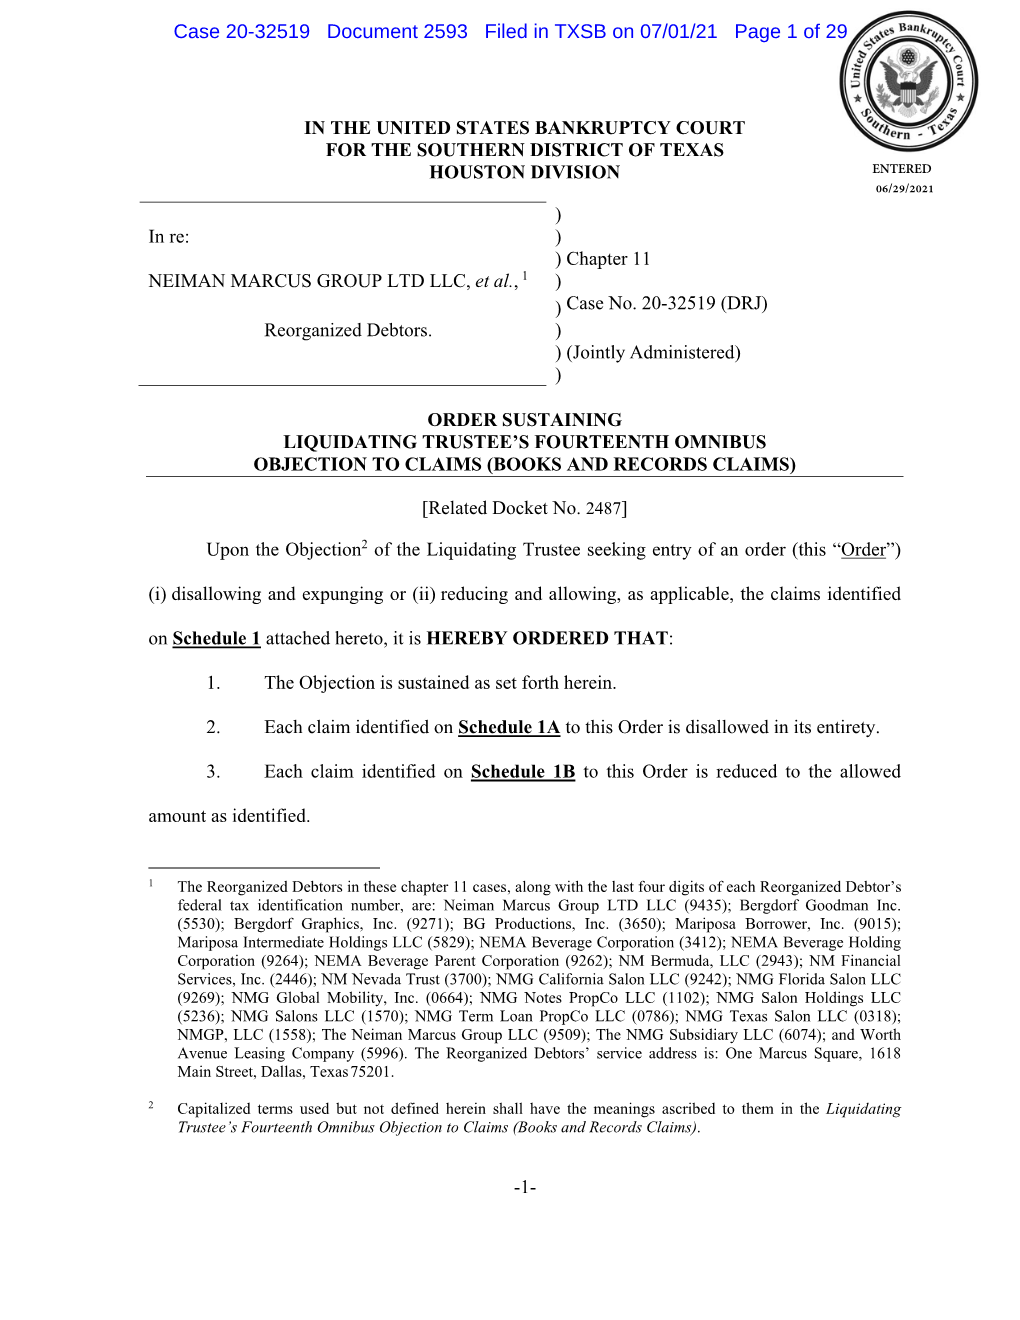 Case 20-32519 Document 2593 Filed in TXSB on 07/01/21 Page 1 of 29